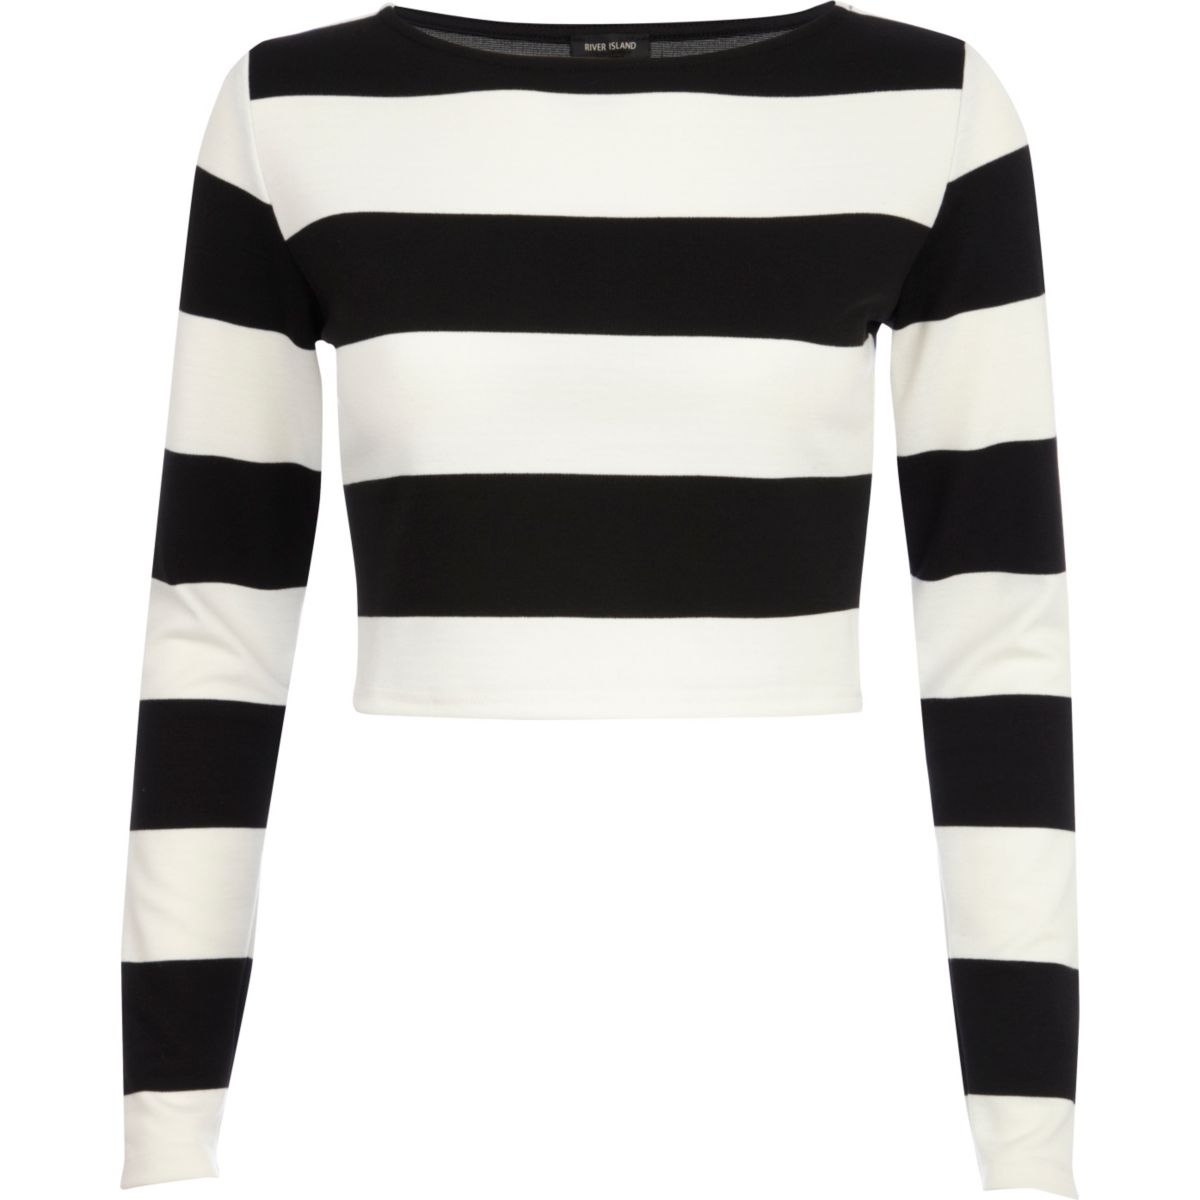 Black and white chunky stripe crop top - Tops - Sale - women